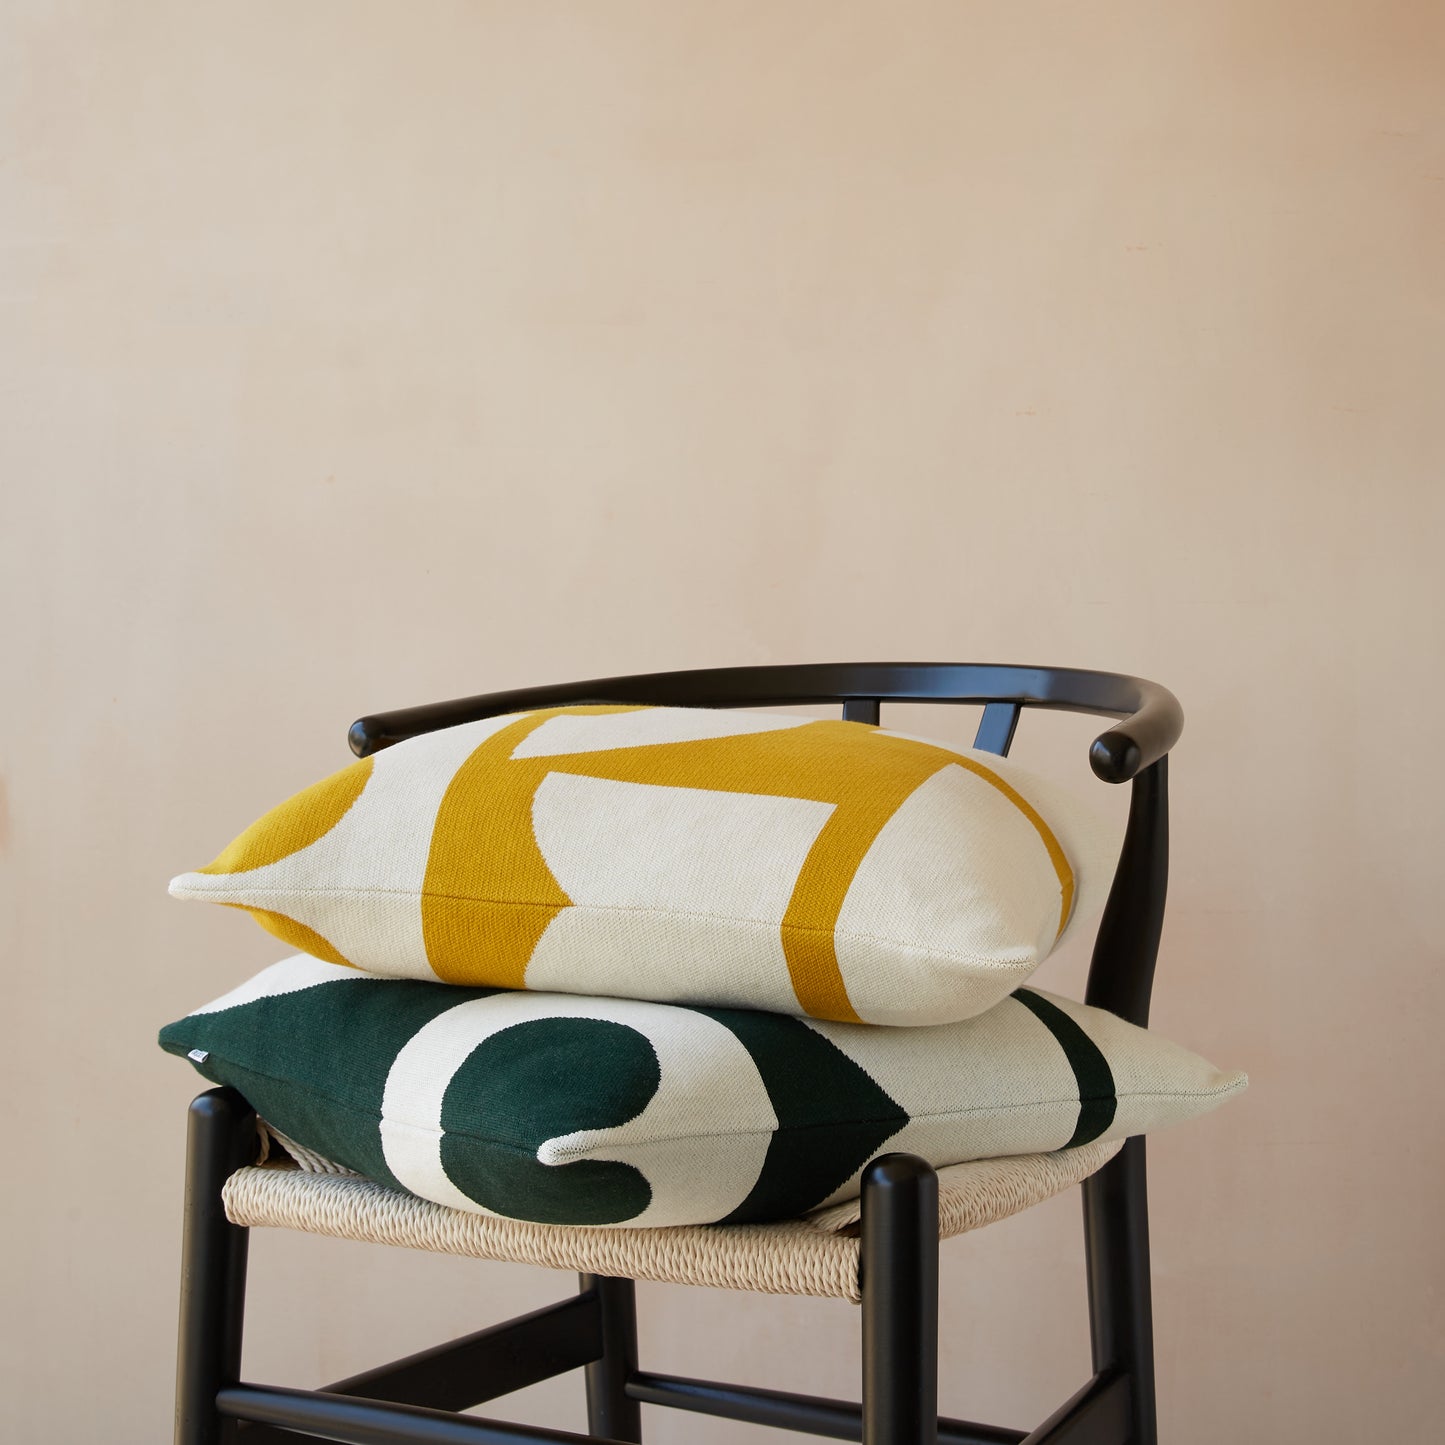 Bruten Cushion Cover: Forest